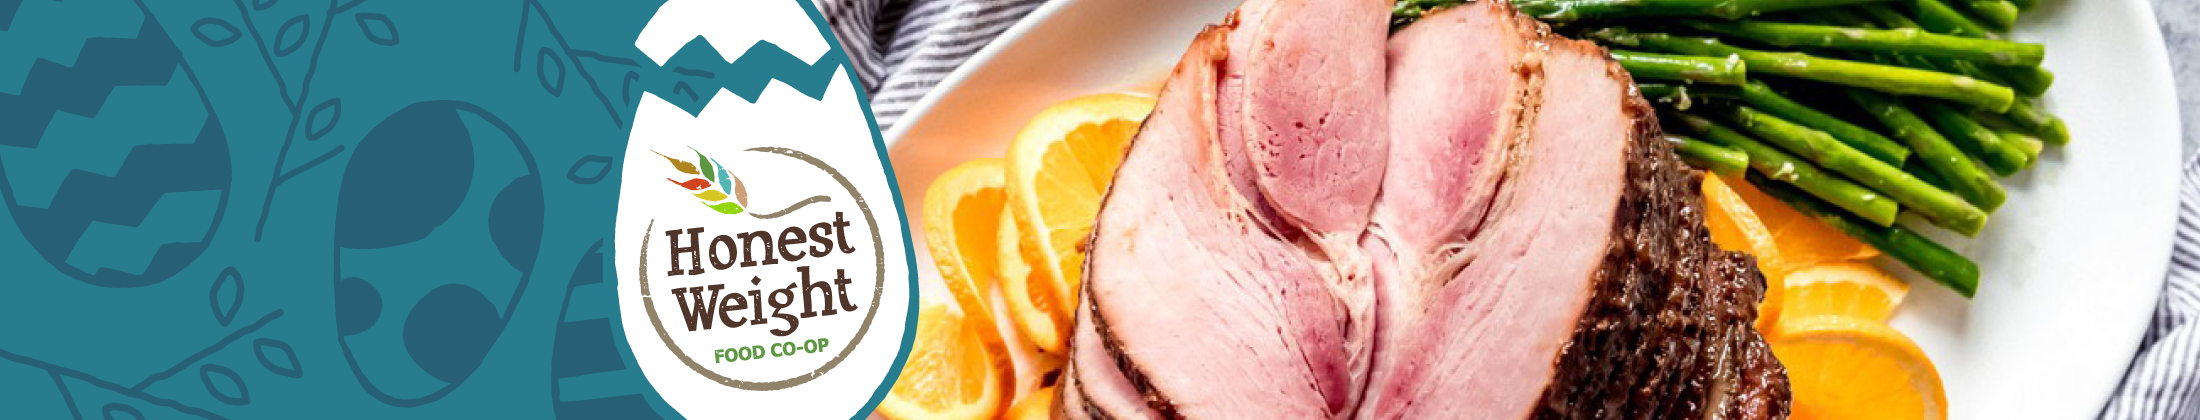 Easter Ham Paired with Asparagus & Oranges